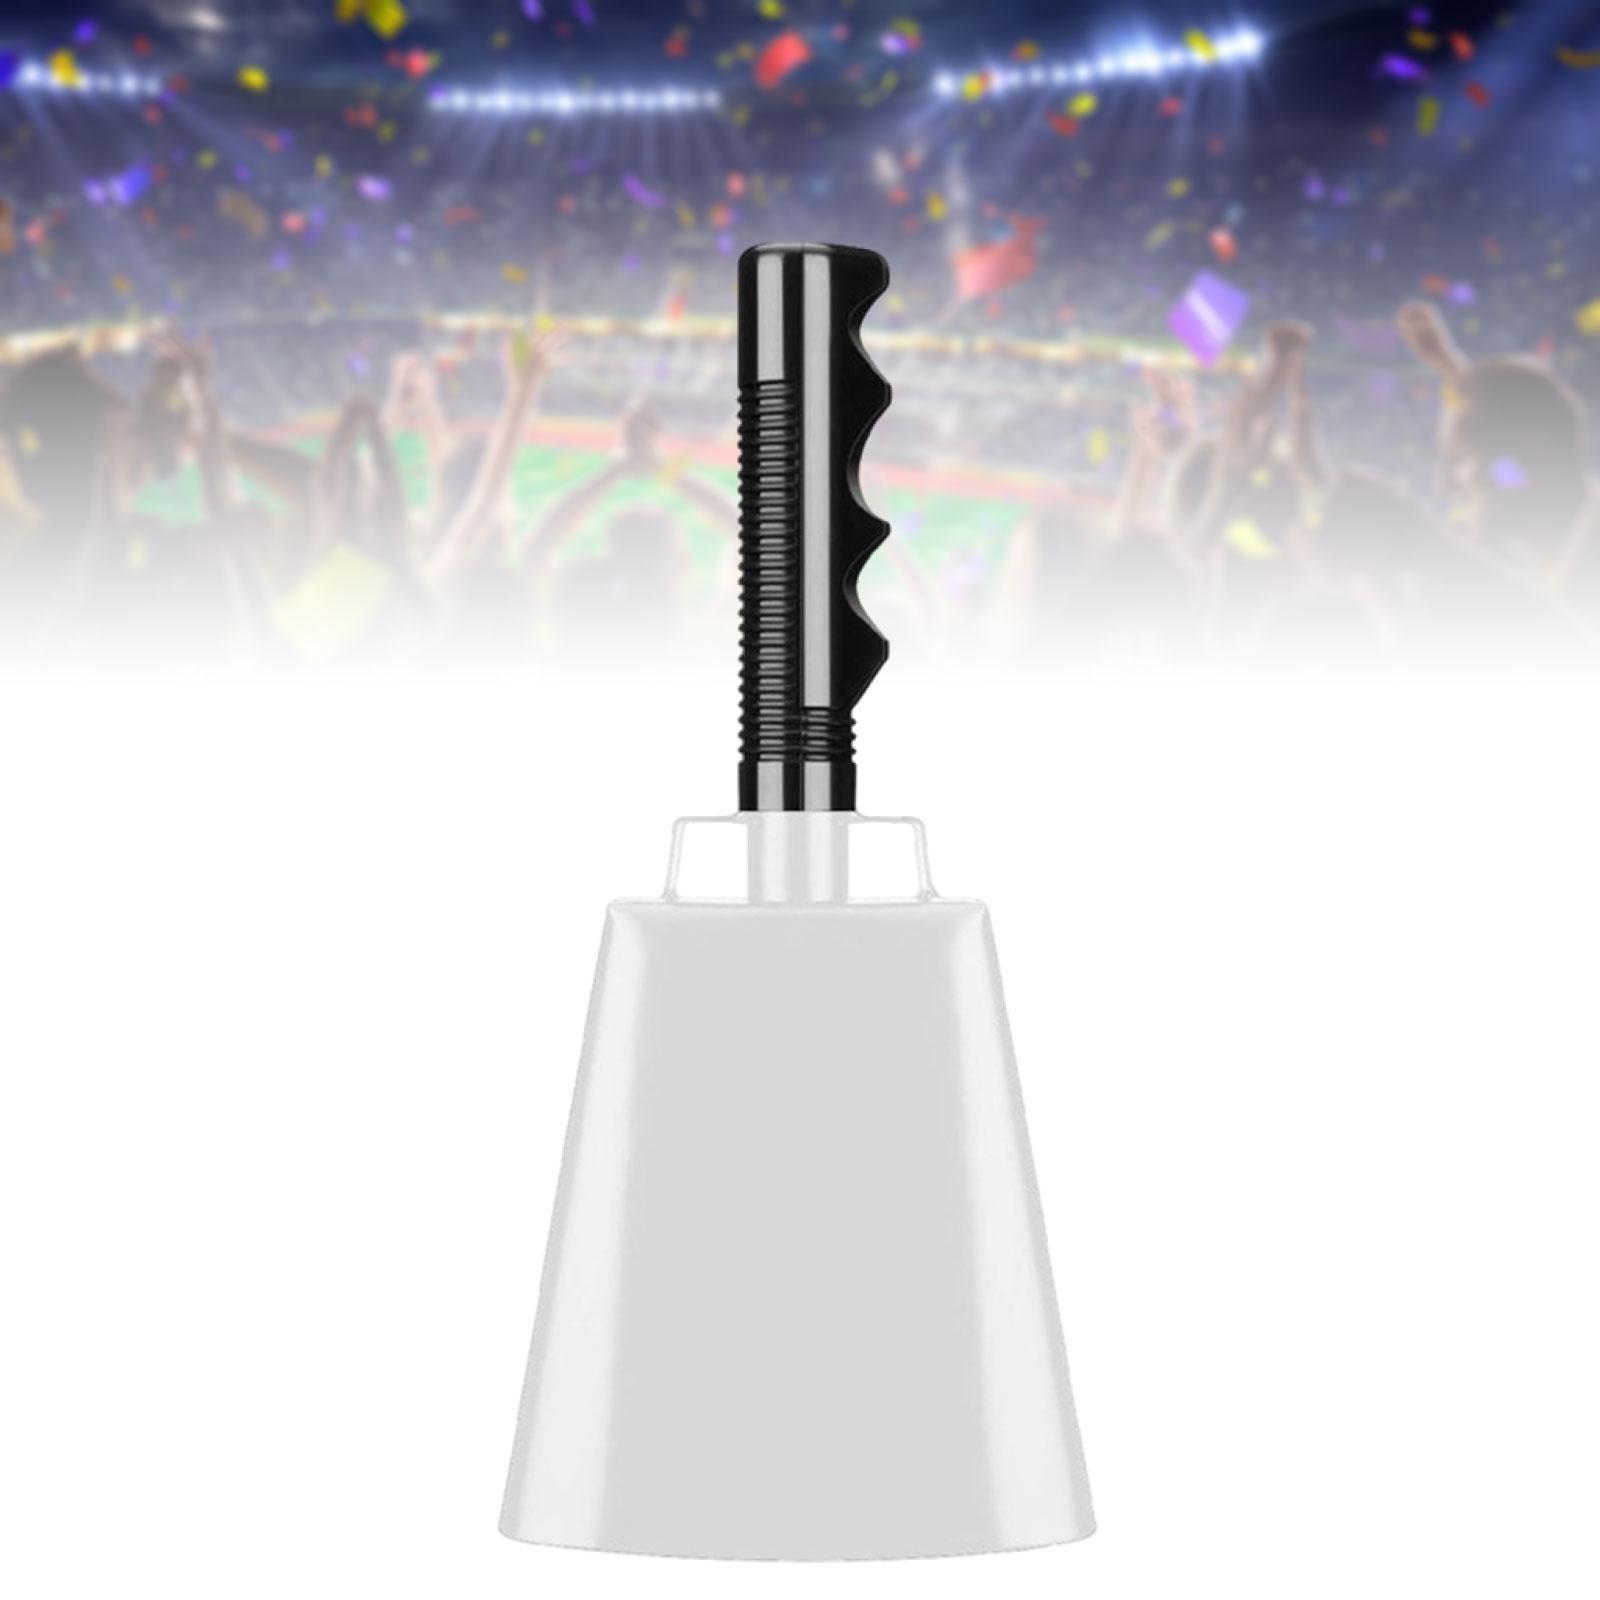 Cow Bell Cowbell with Handle for Football Team Cheering Concert